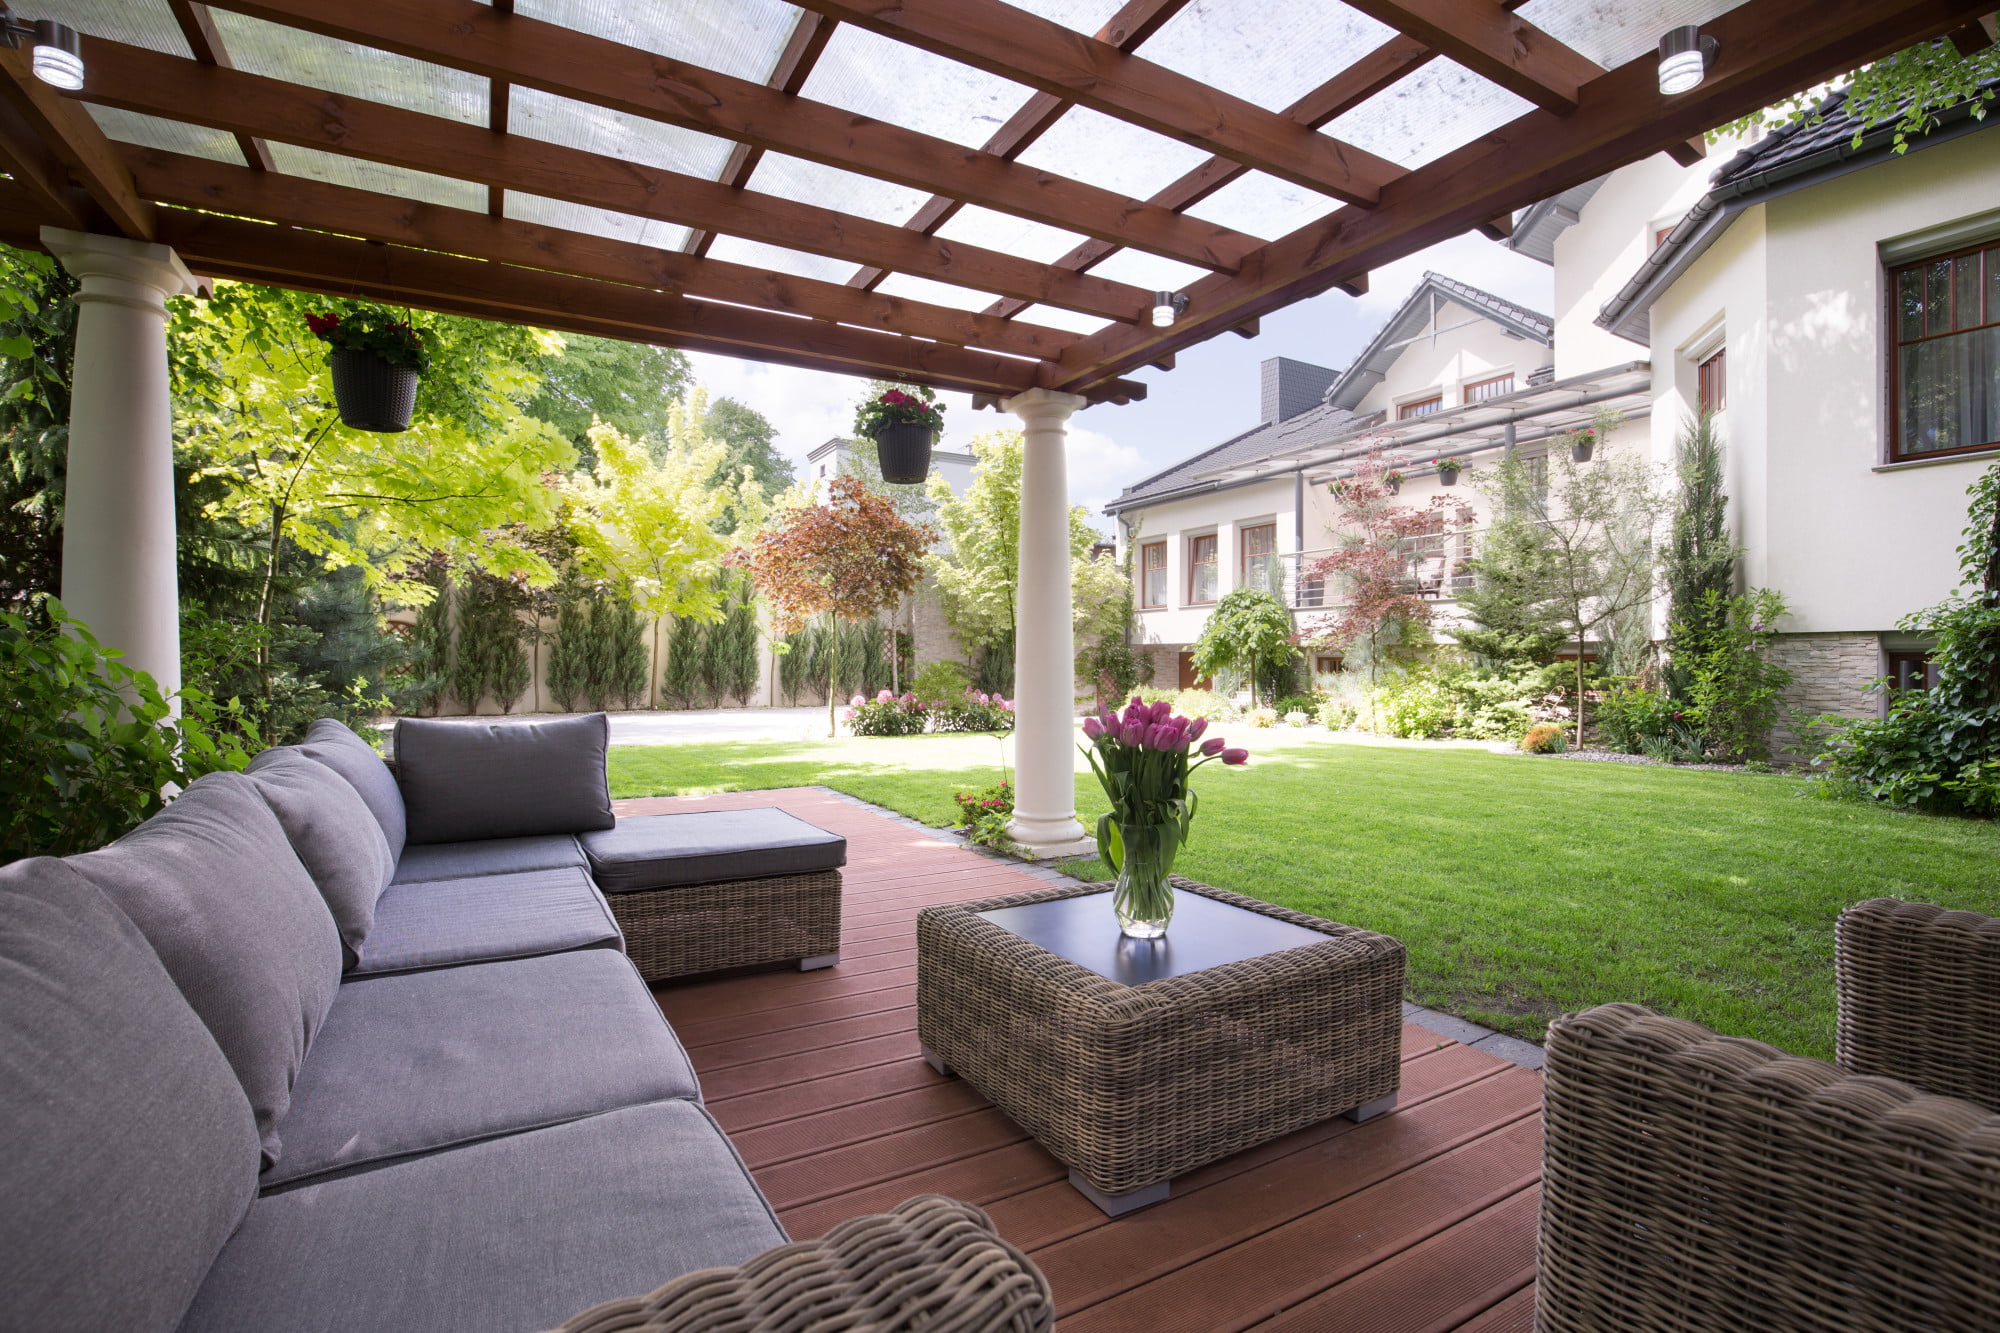 Are you looking to transform your outdoor space with a few design changes? Here are 5 design ideas for some inspiration.